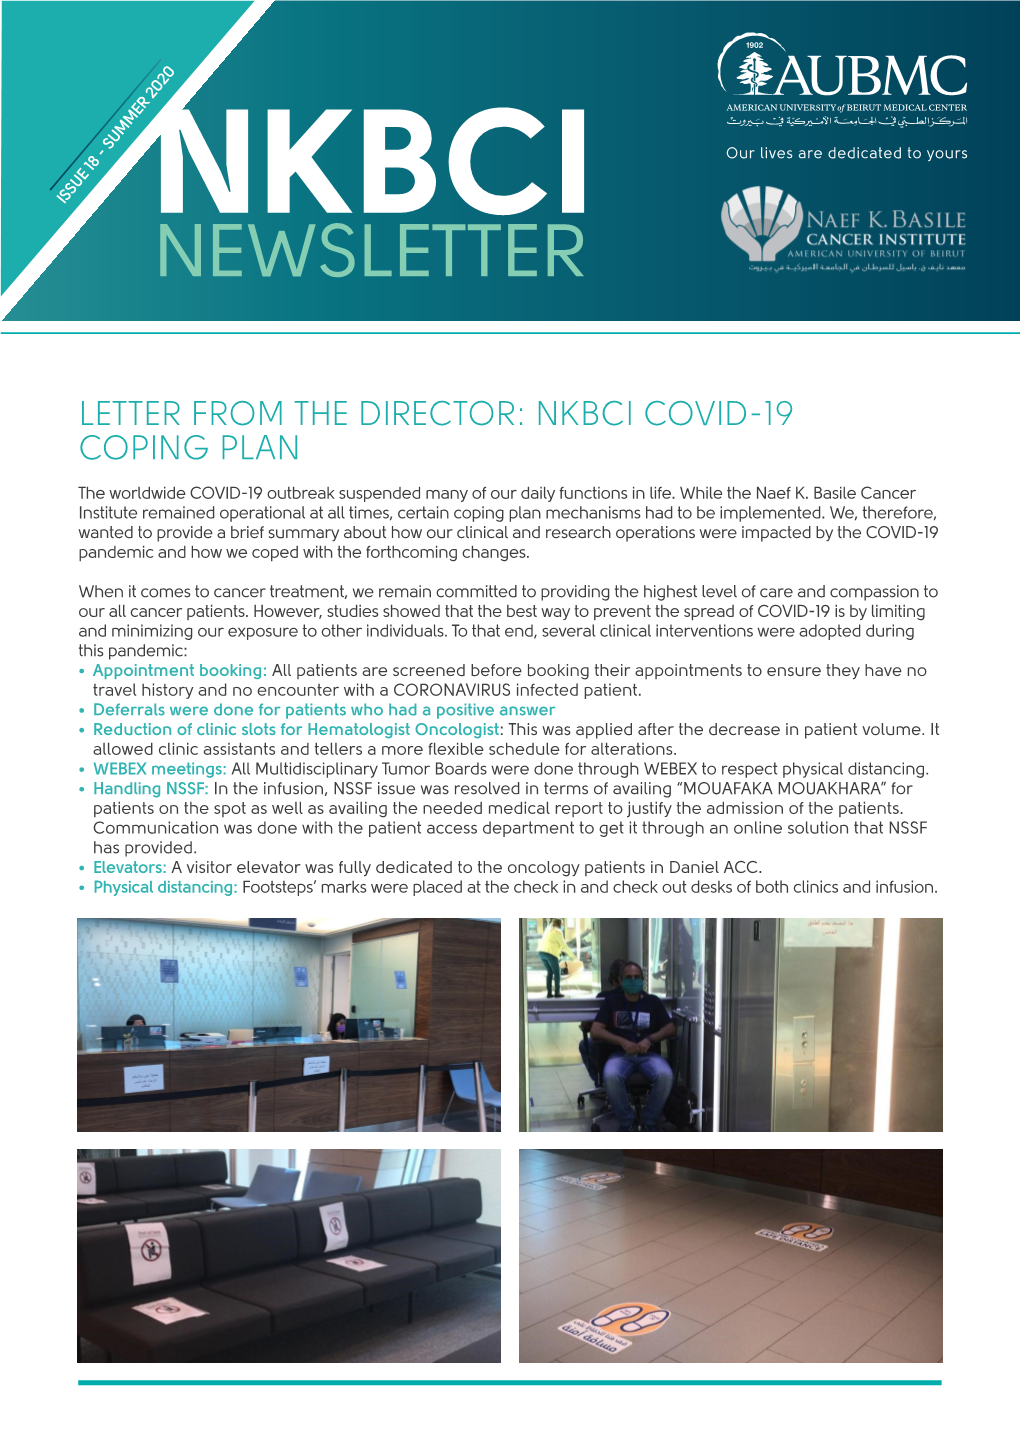 Letter from the Director: Nkbci Covid-19 Coping Plan